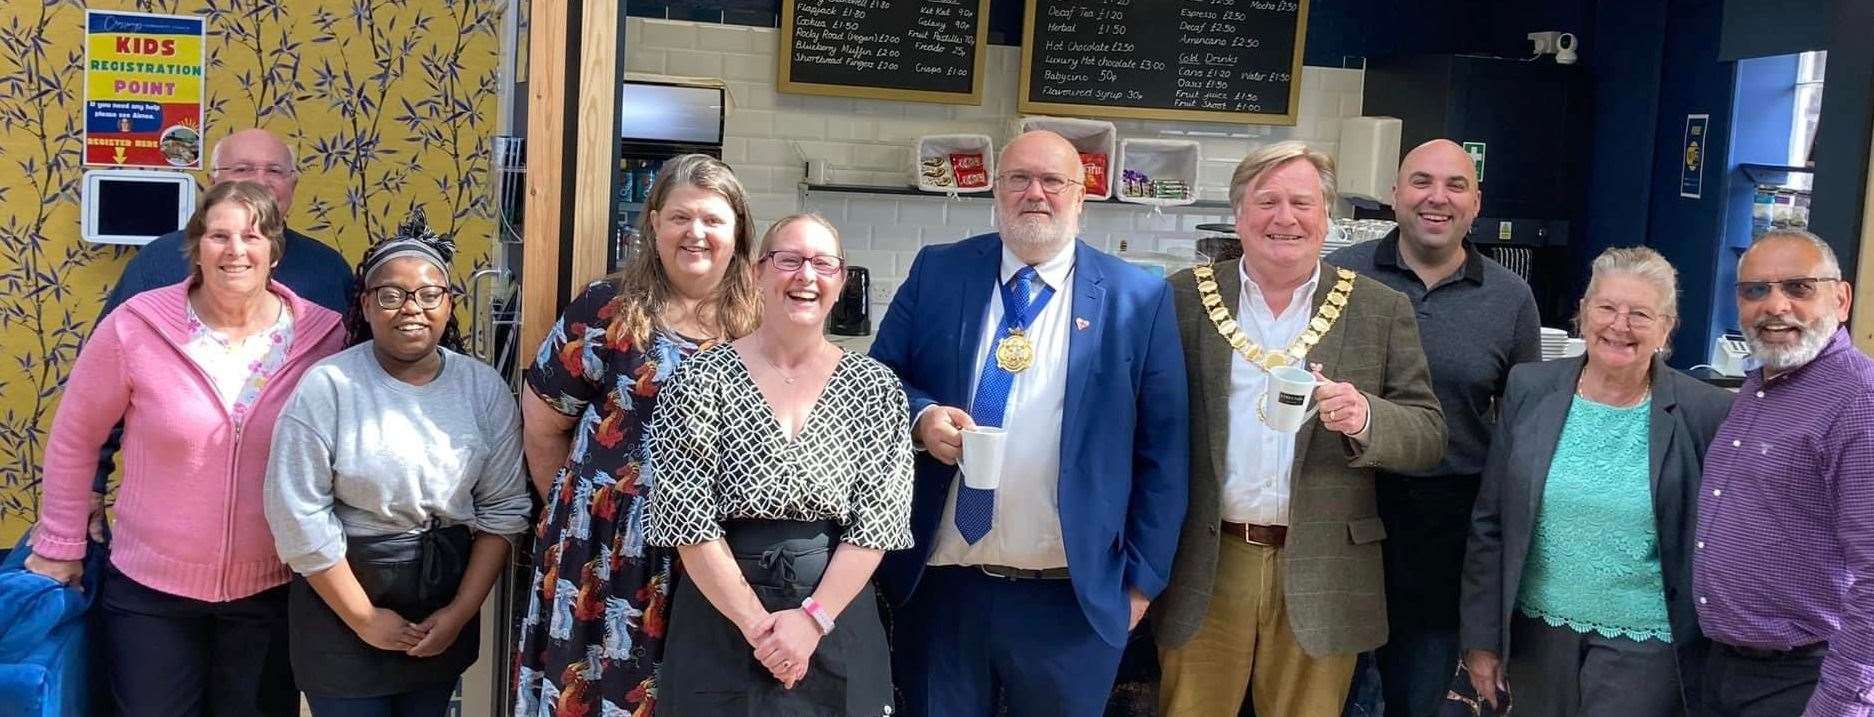 Dartford Borough Council leader Jeremy Kite and Dartford Mayor Councillor Paul Cutler enjoyed the opening day of new community cafe The Lounge at Acacia Hall in Dartford